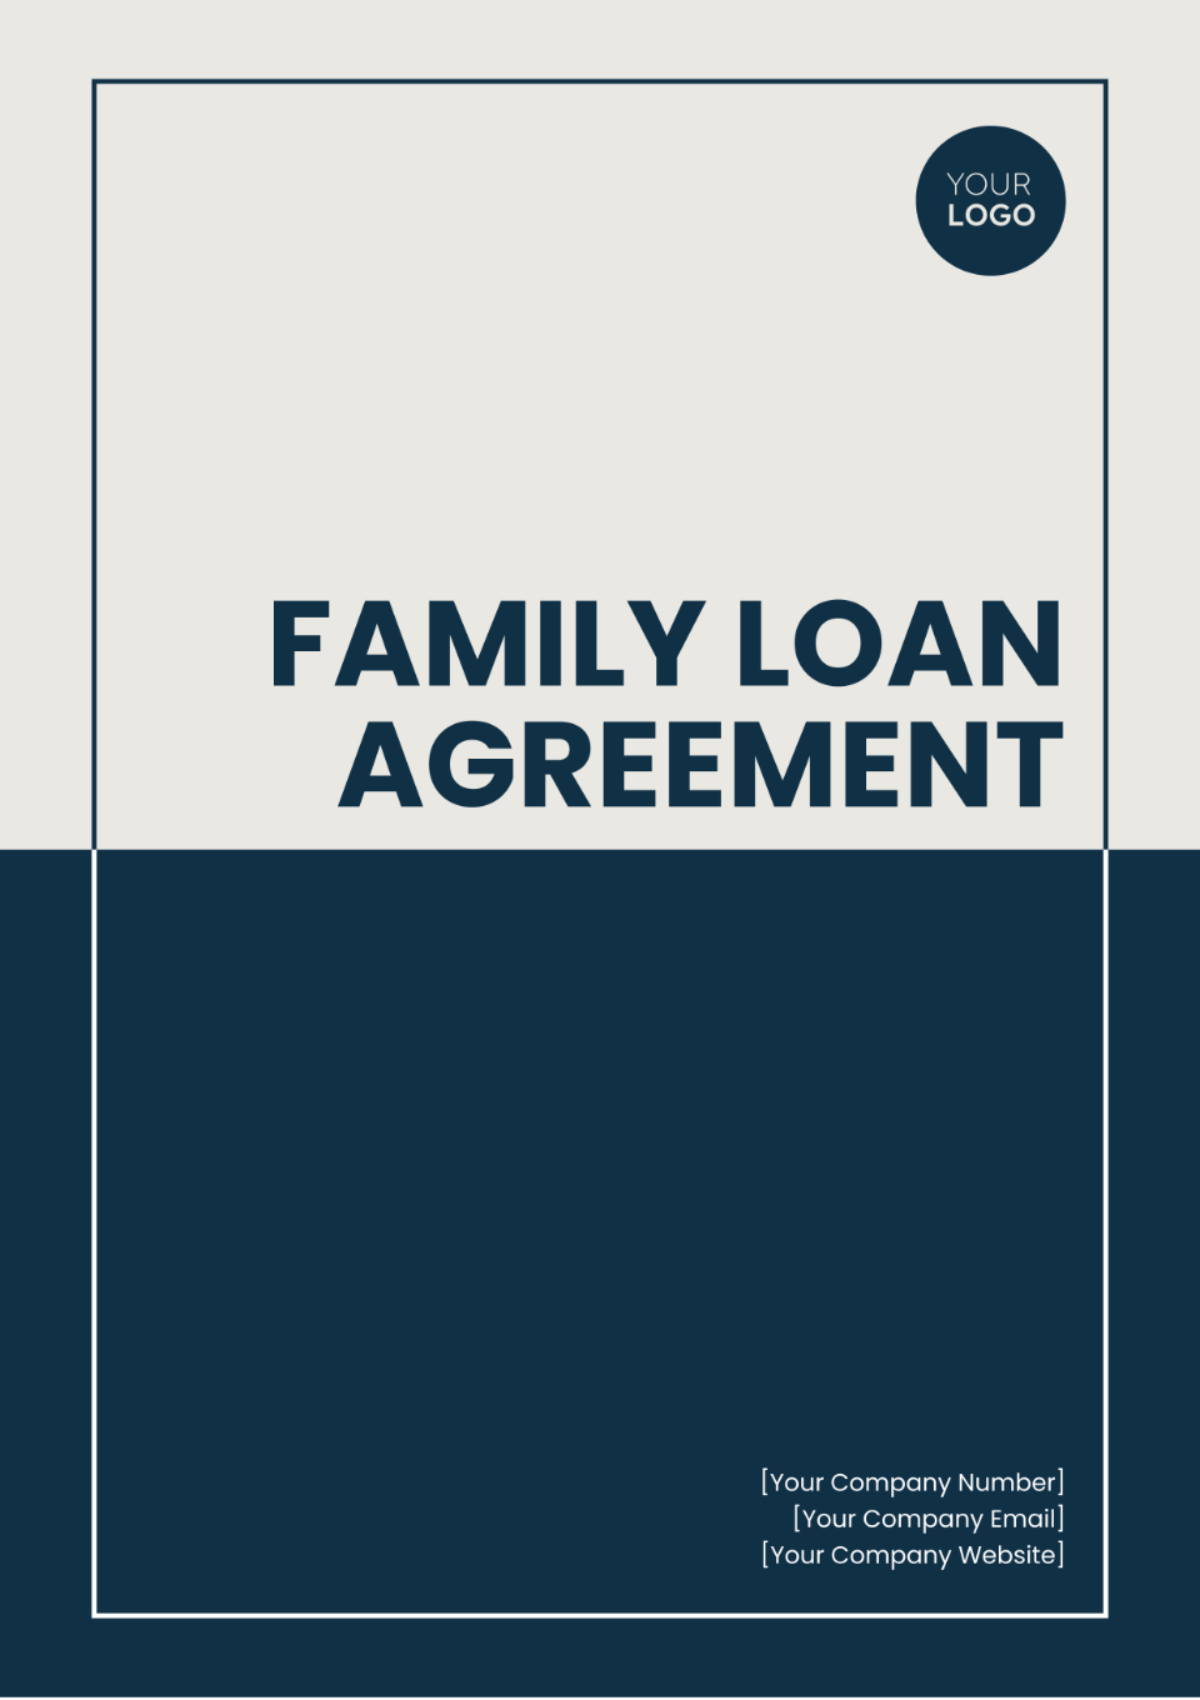 Free Family Loan Agreement Template